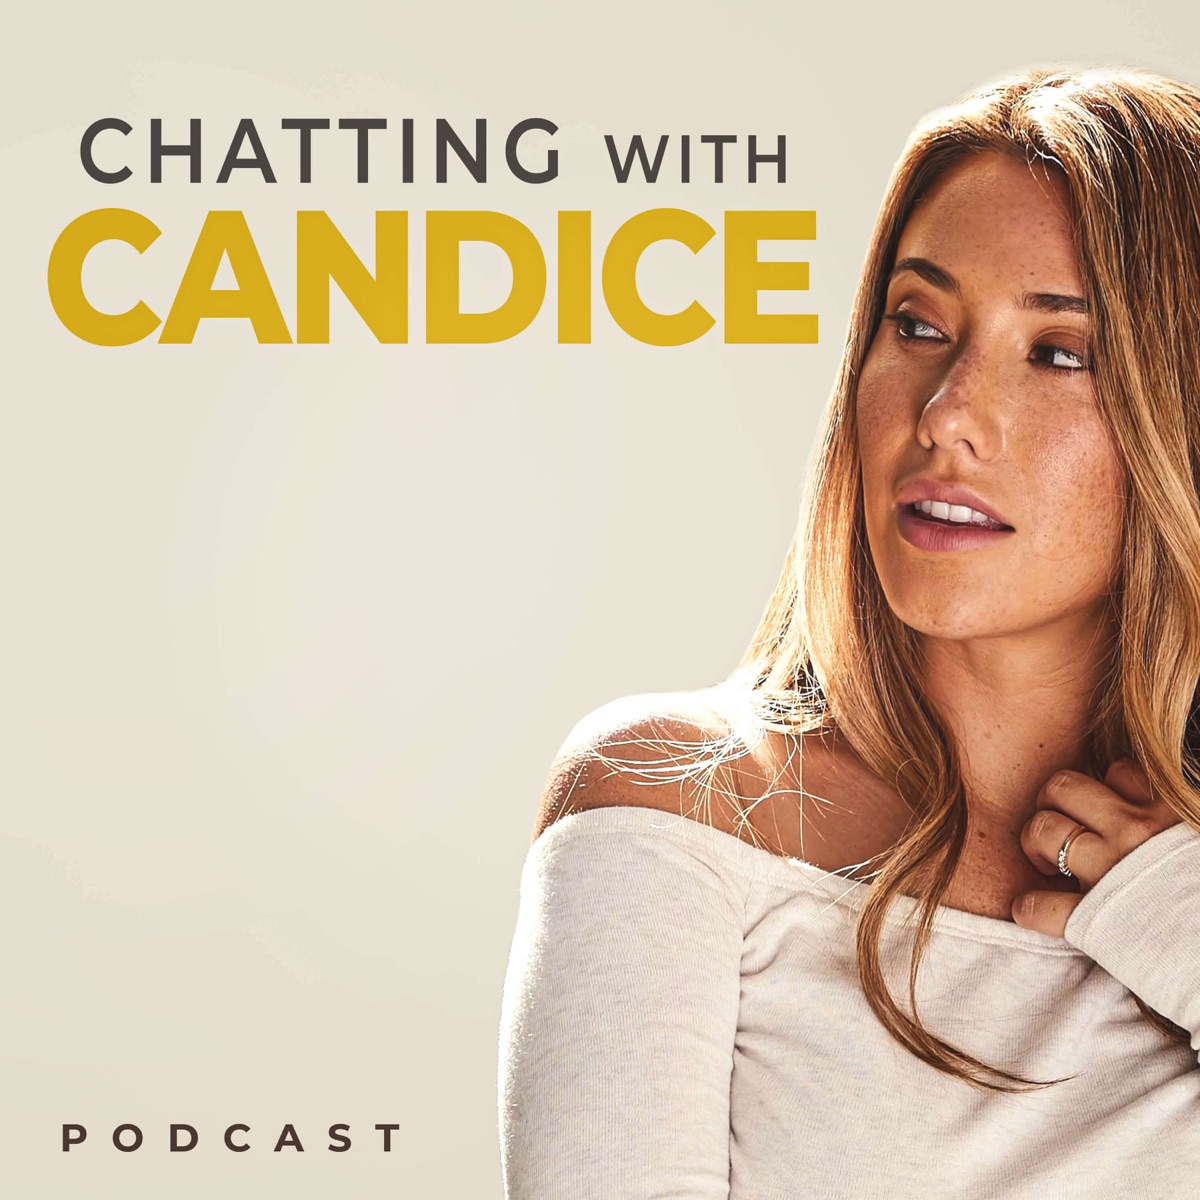 Mia Sara Pussy - #23 Mia Malkova- Happiness, Love, and Twitch â€“ Chatting with Candice â€“  Podcast â€“ Podtail